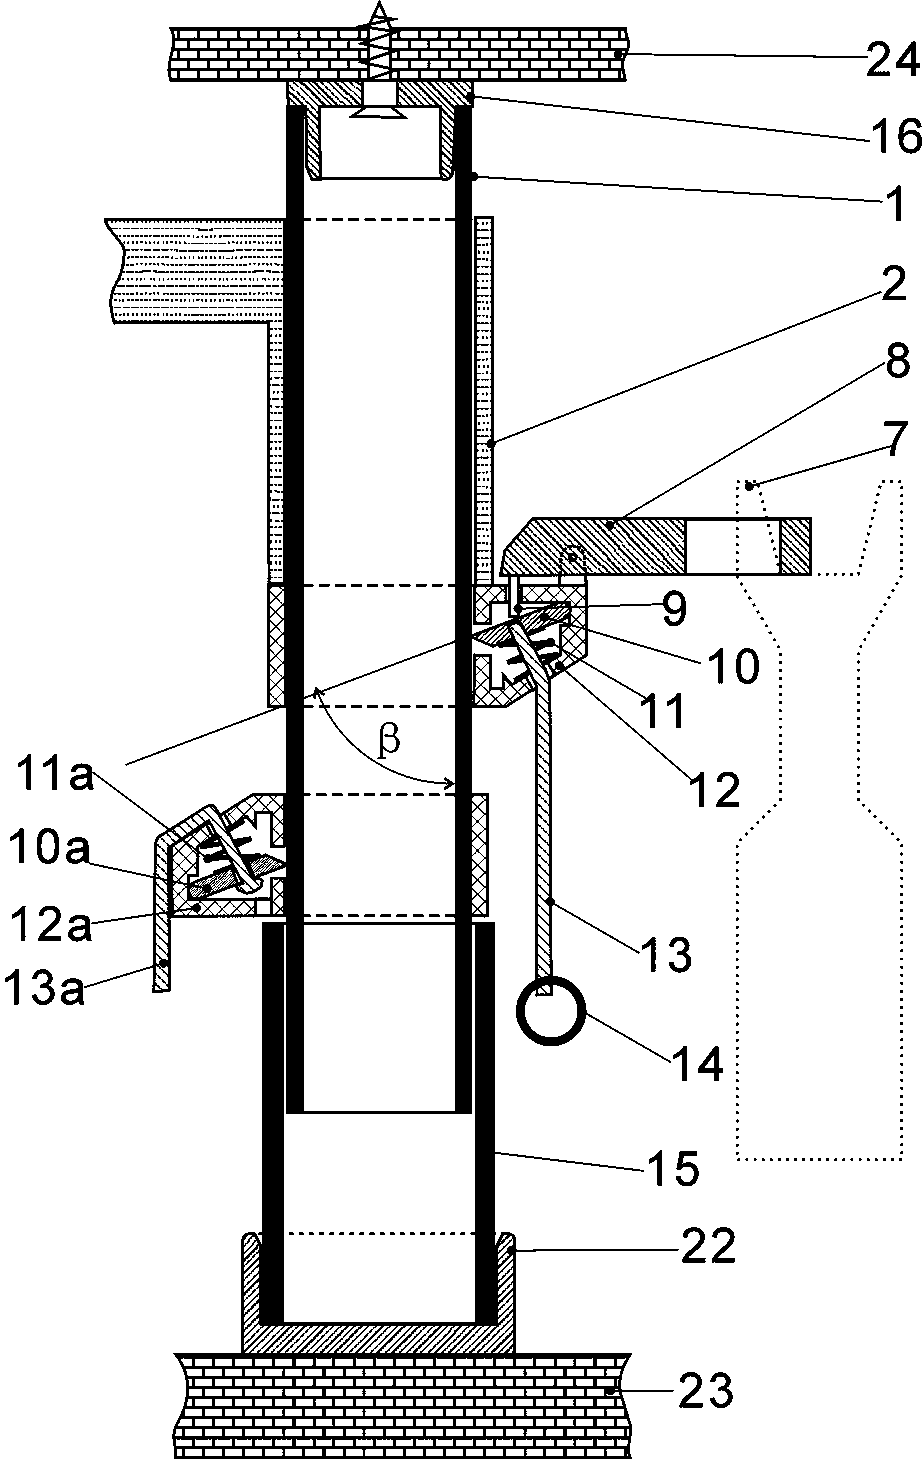 Mosquito net support with struts and sliding locks